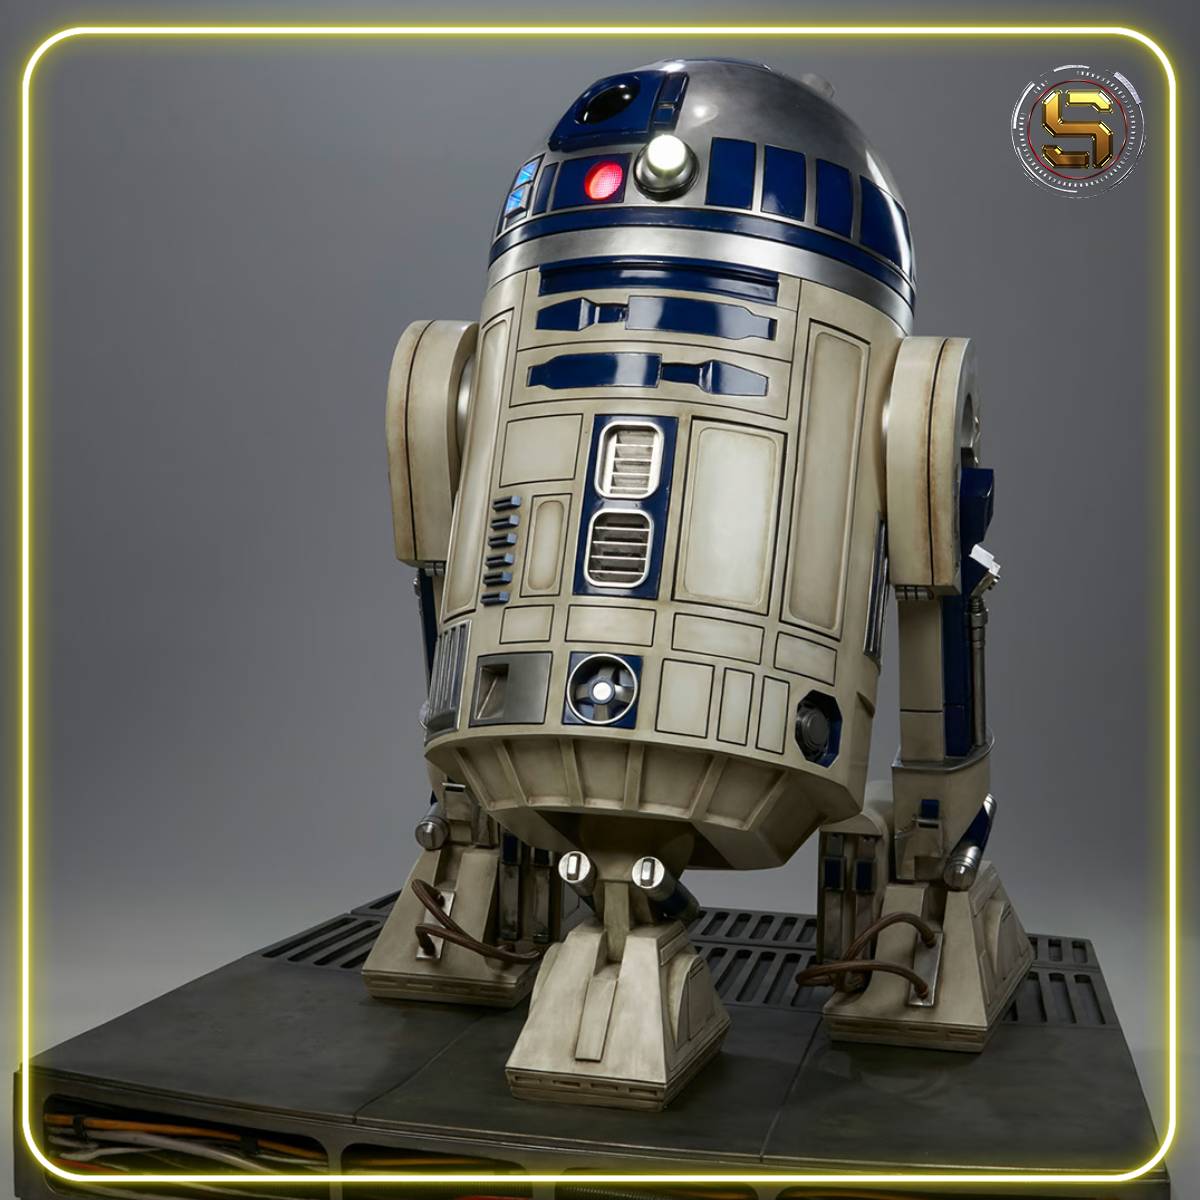 SIDESHOW STAR WARS R2-D2 LIFE-SIZE FIGURE